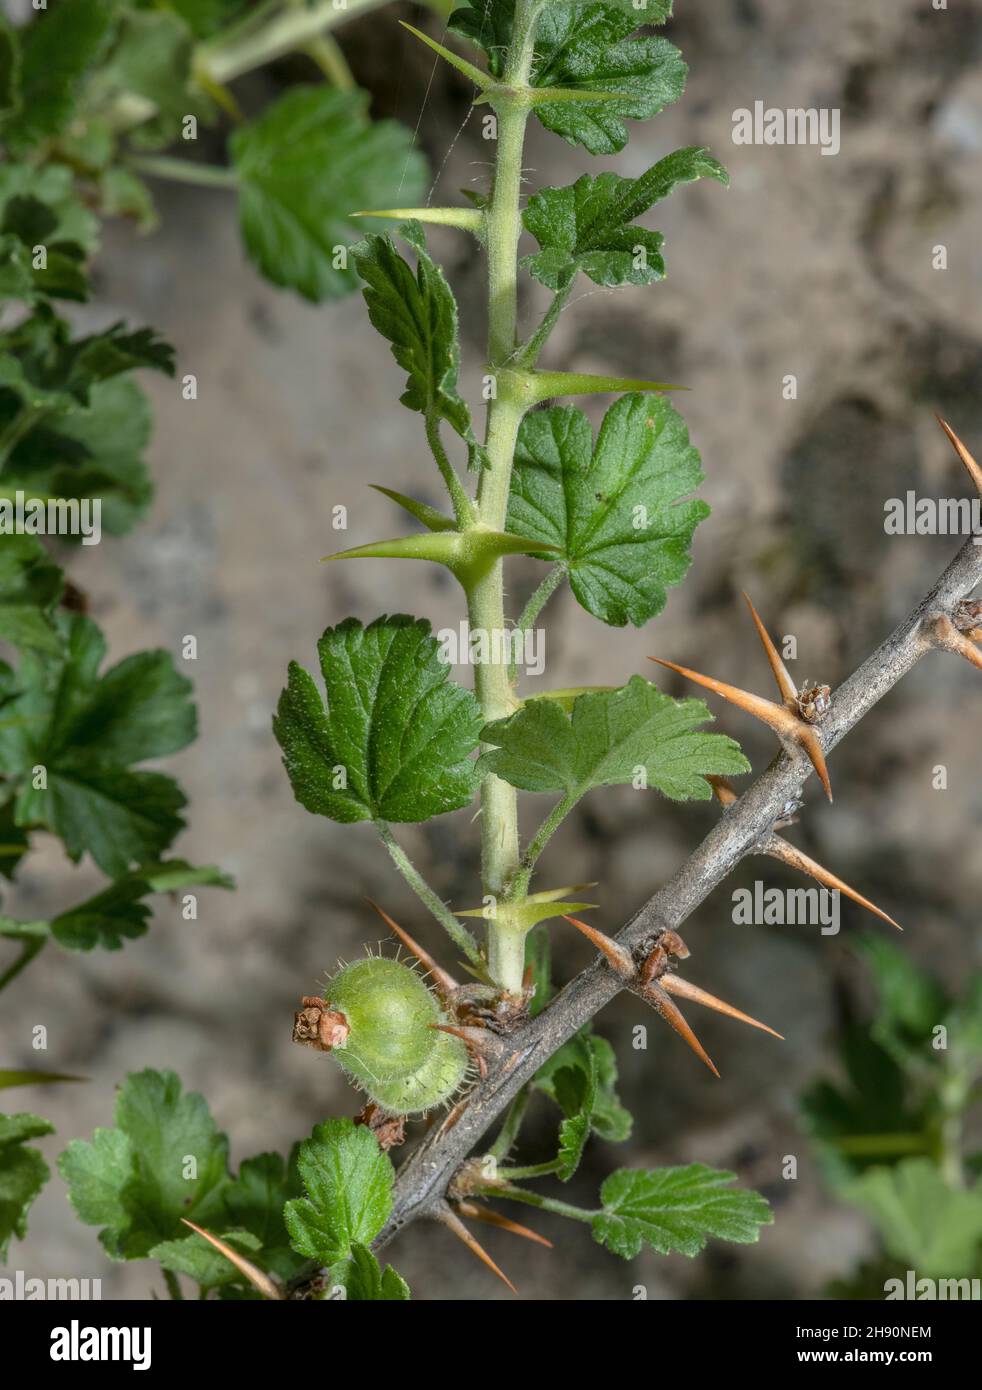 Wild Gooseberry, Ribes uva-crispa, showing developing fruit, and spines. Stock Photo